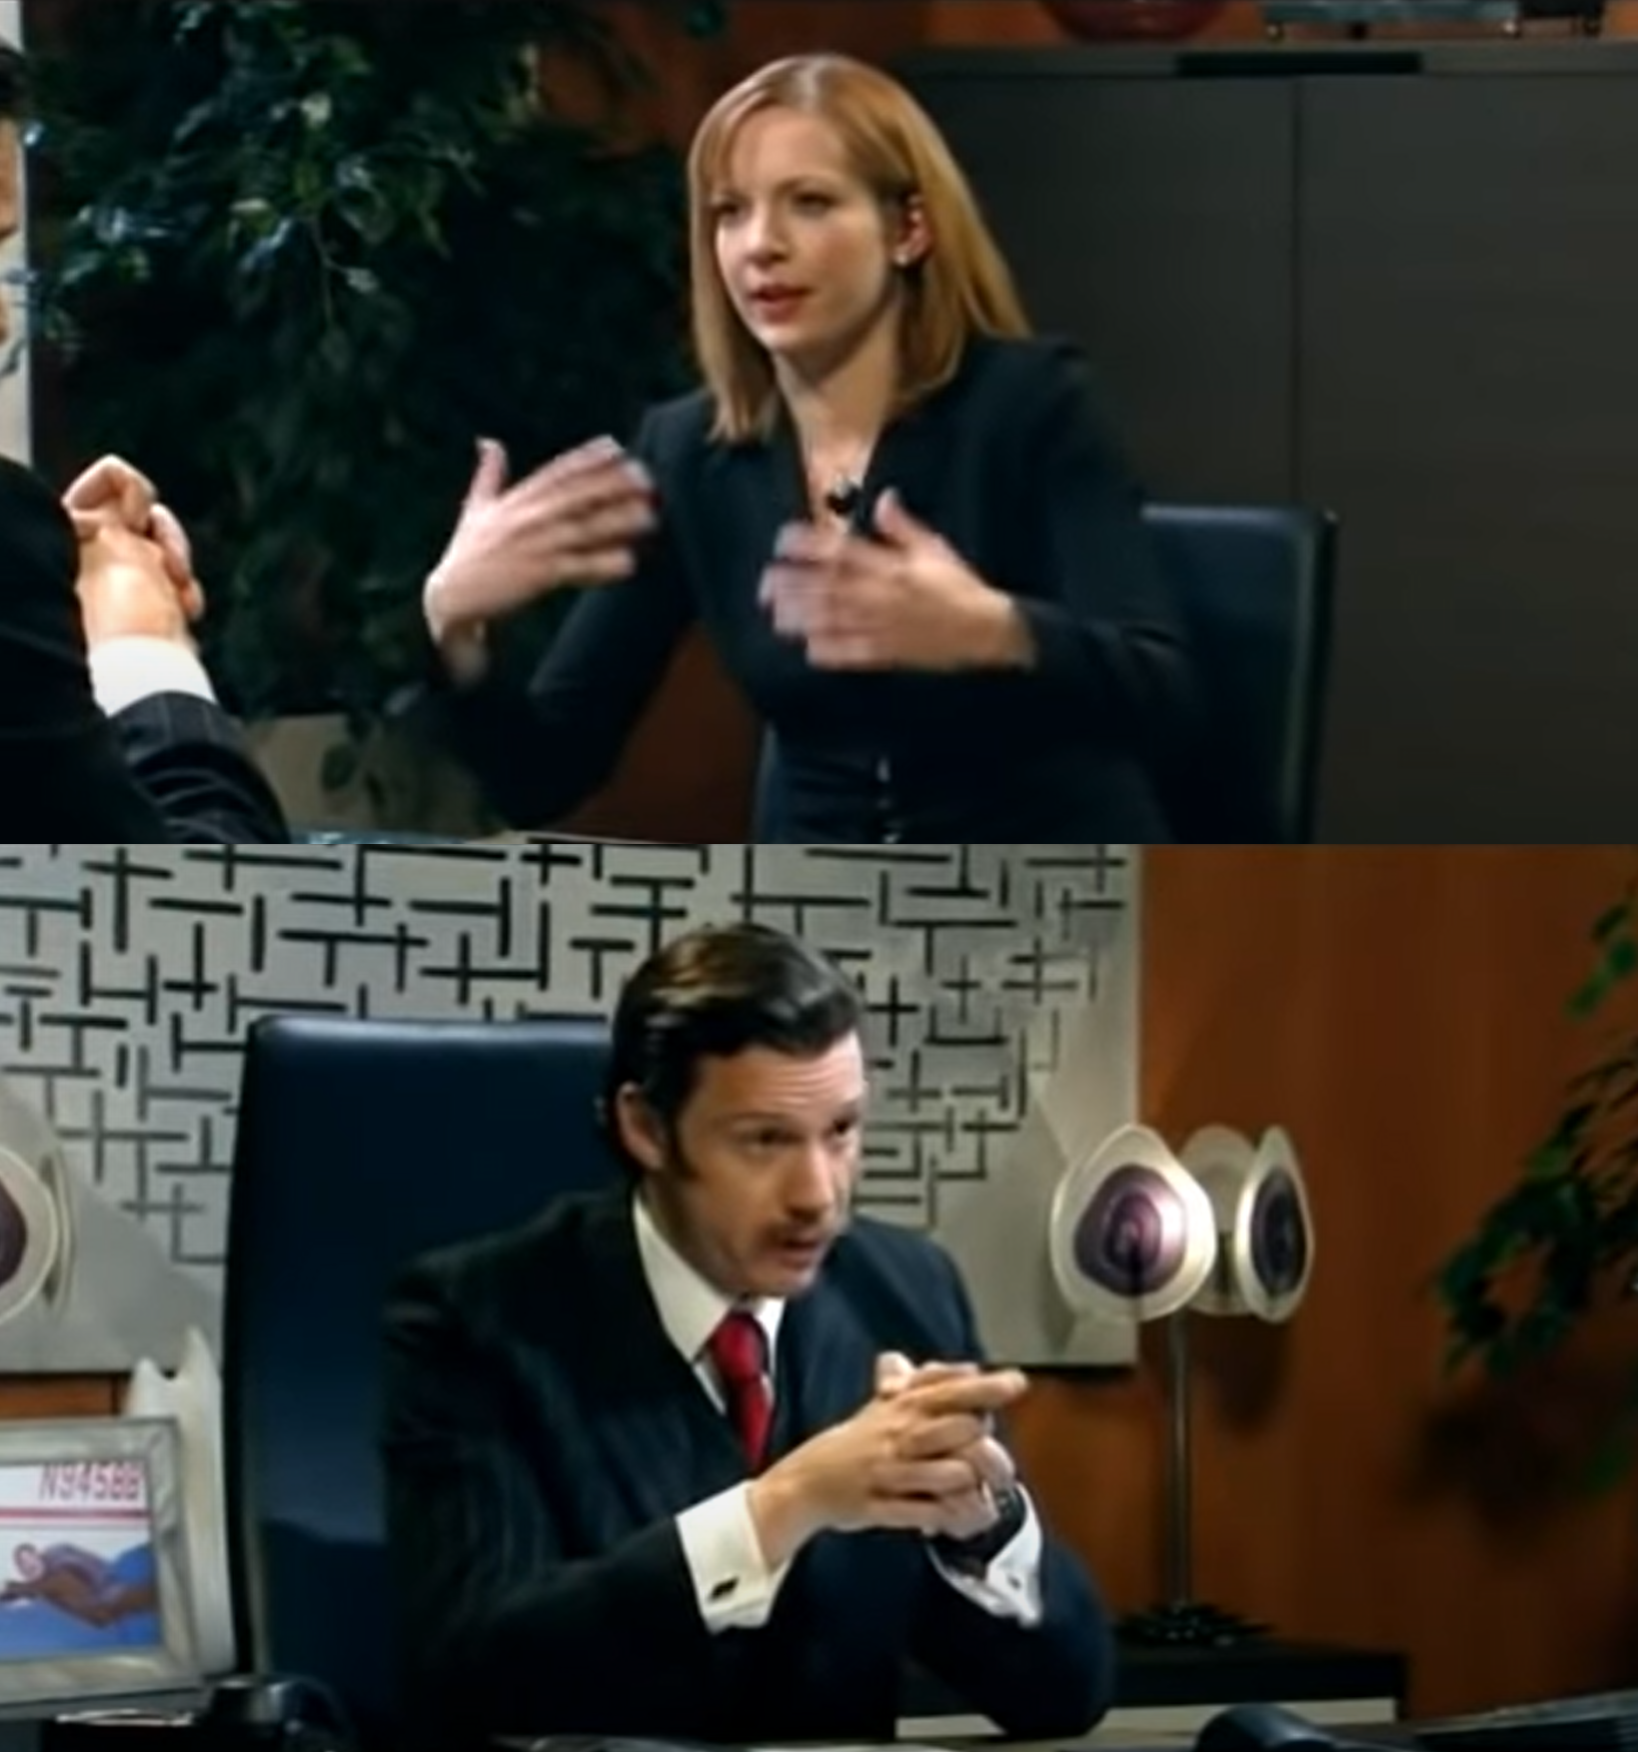 High Quality The IT crowd interview Blank Meme Template